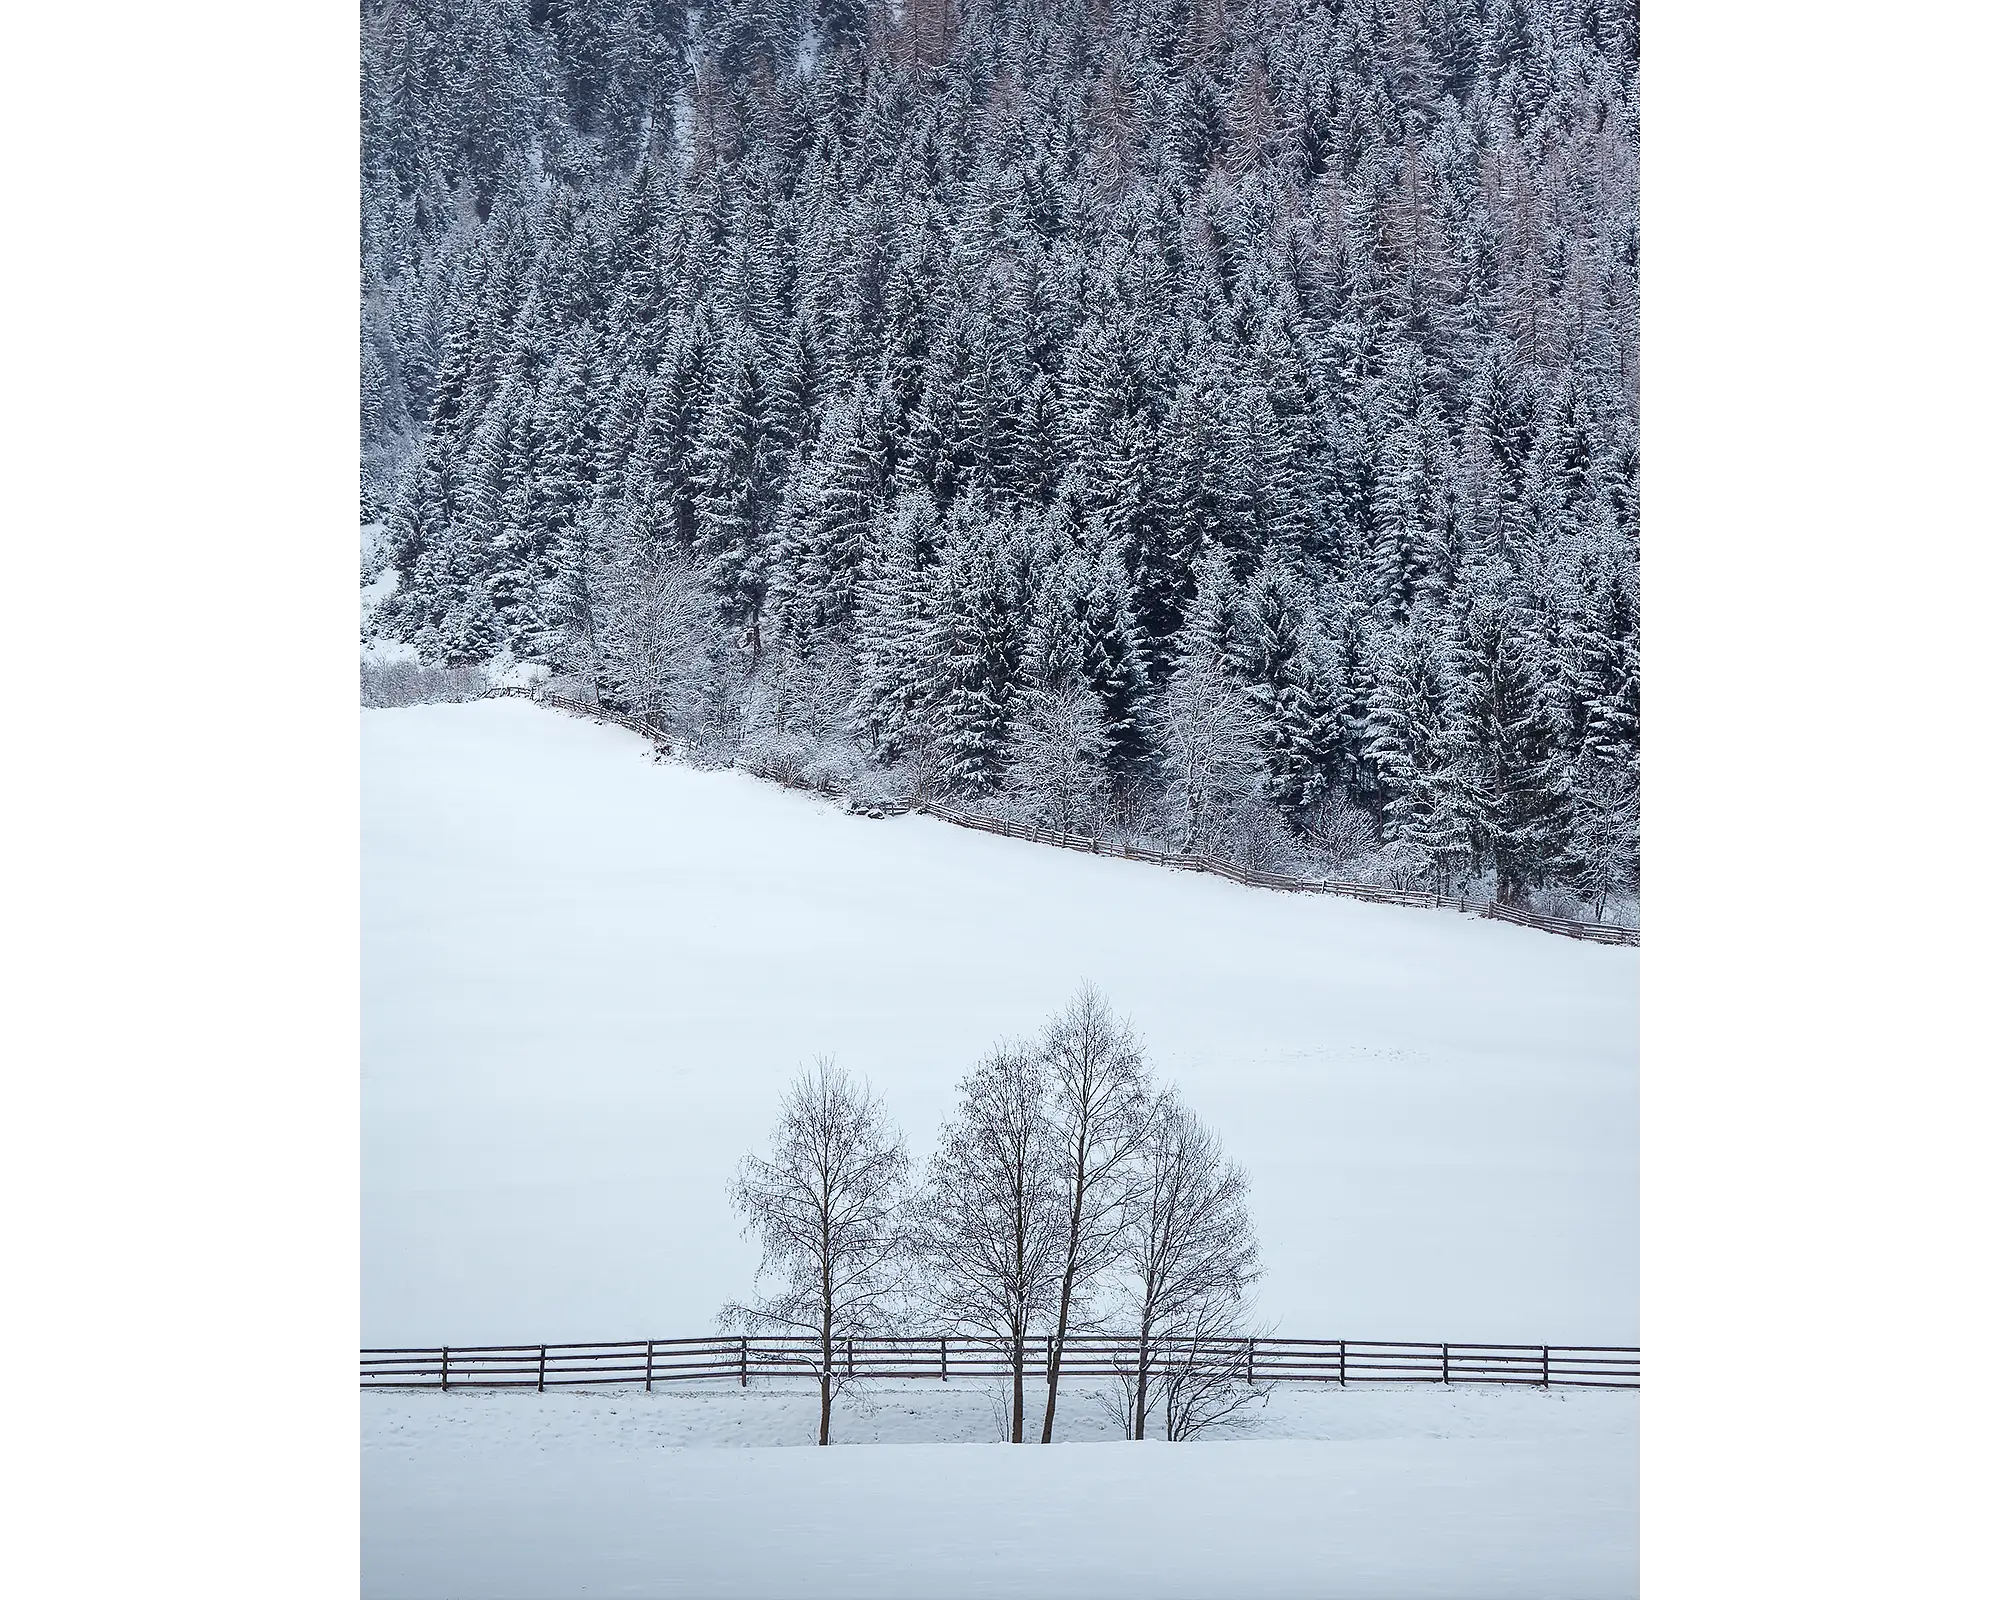 Winter Discovery. Trees covered in snow beside a farm, Neustift Tyrol, Austria.